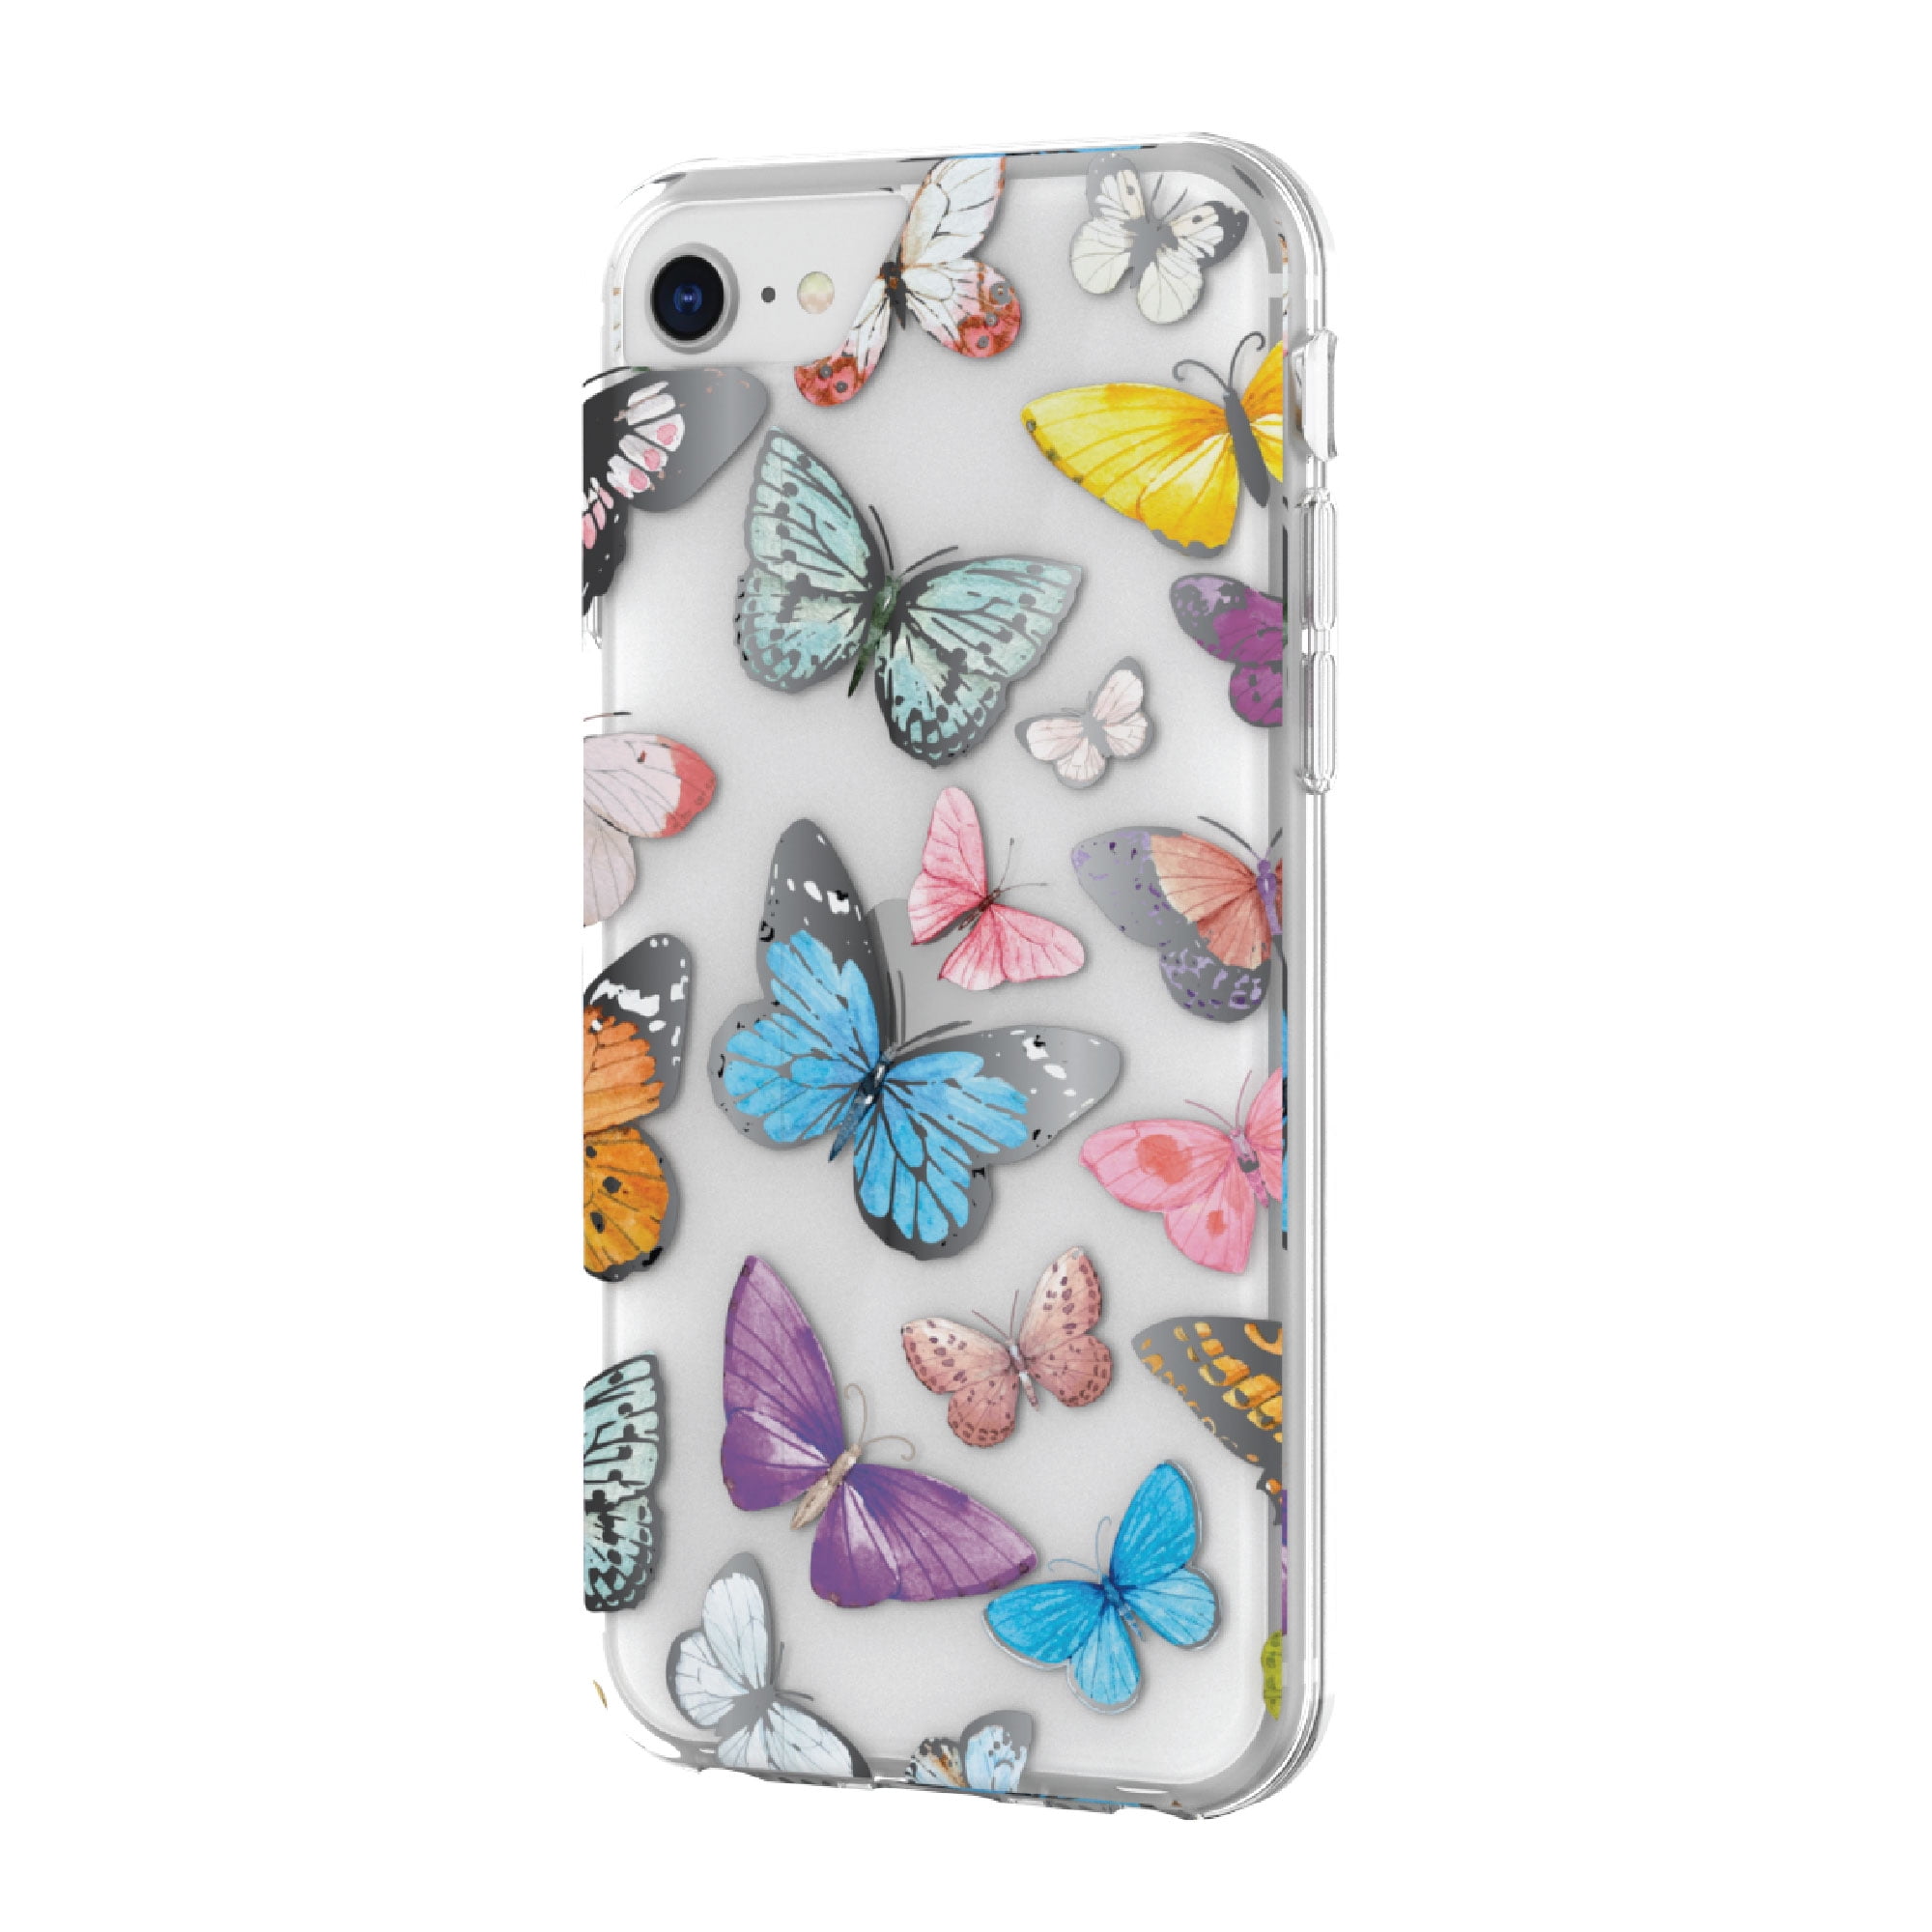 onn. Multicolored Butterflies Phone Case for iPhone 6/6s/7/8/SE